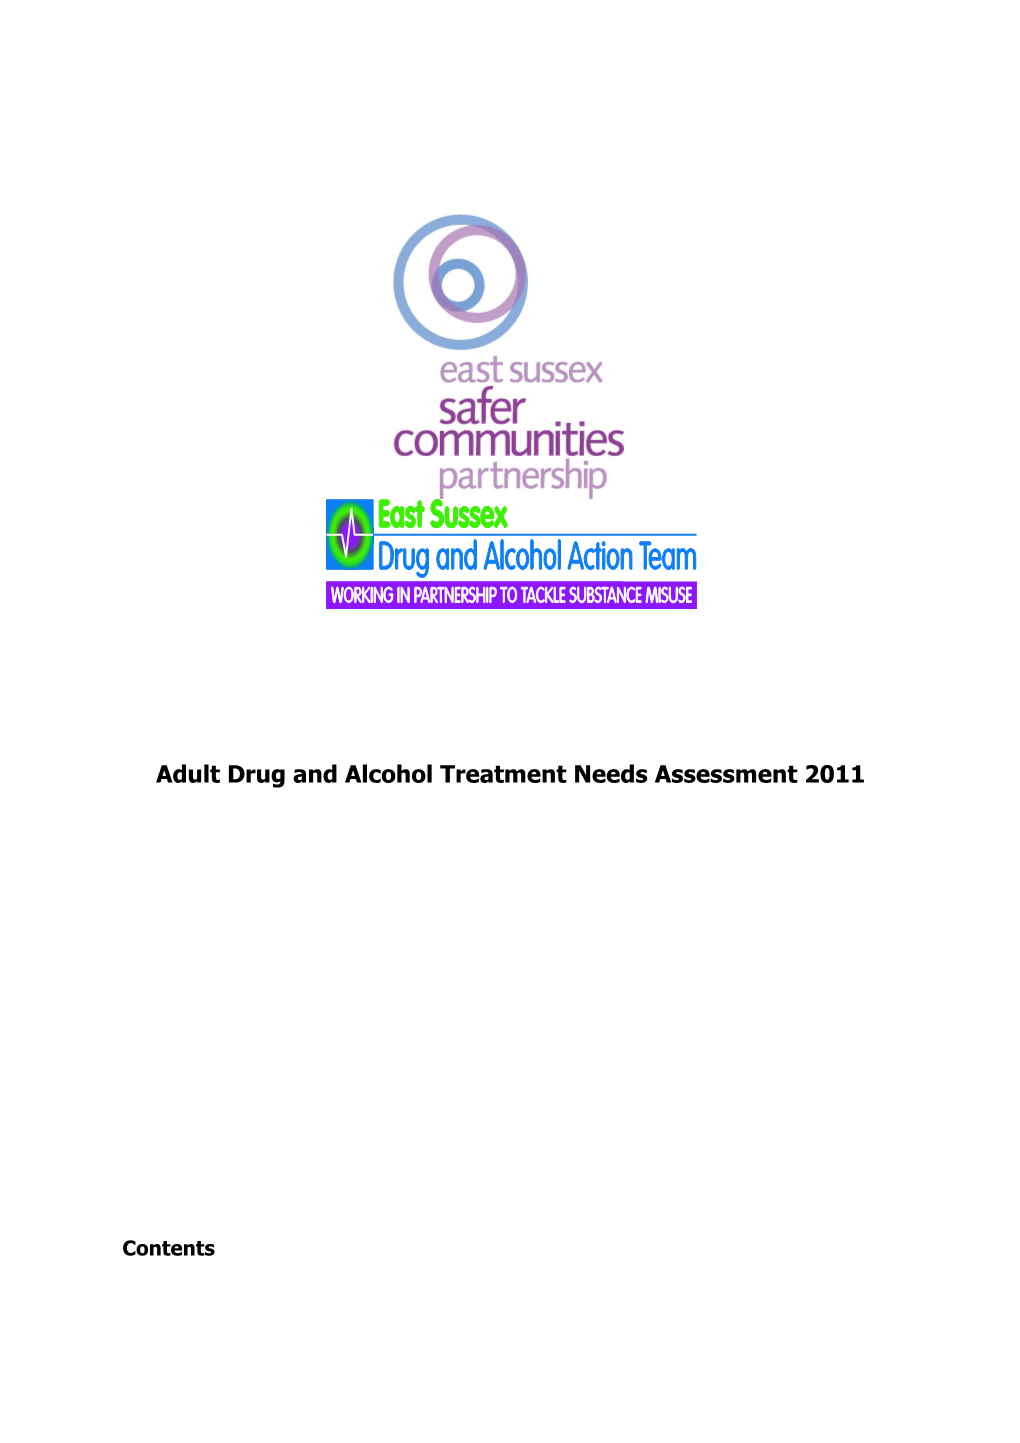 Adult Drug and Alcohol Treatment Needs Assessment 2011